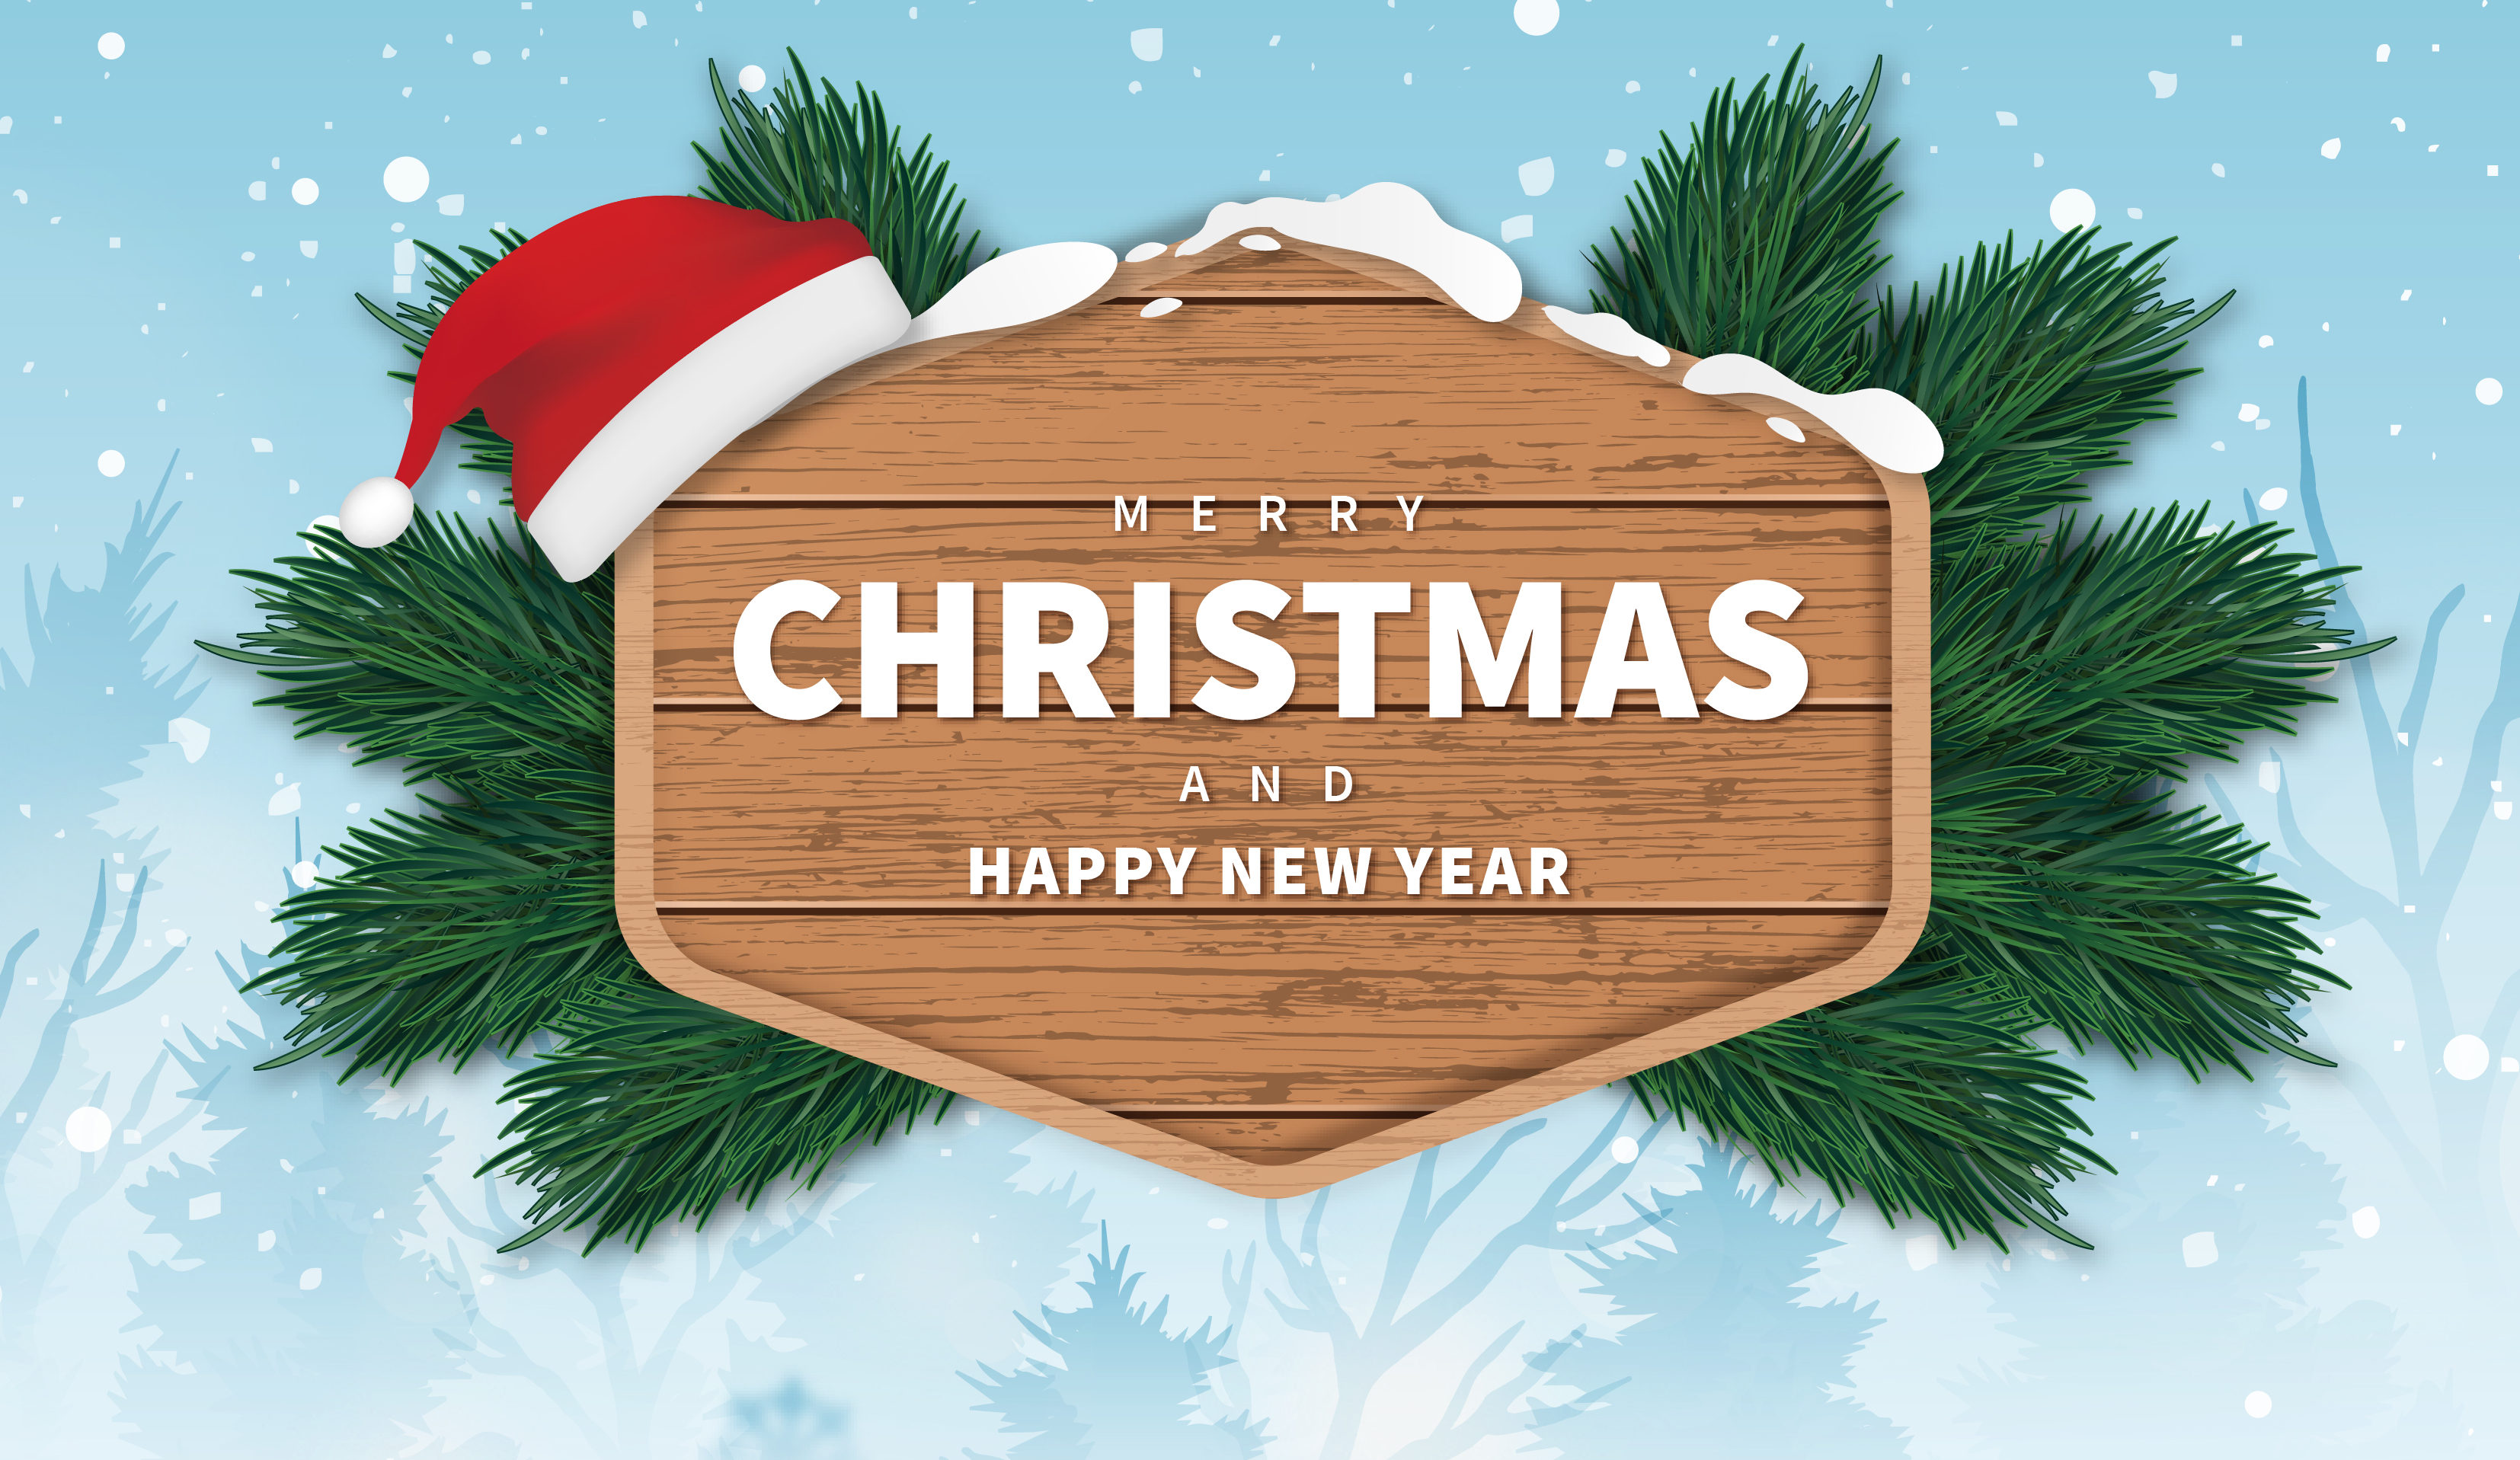 Merry Christmas and happy new year | Mont Rose College